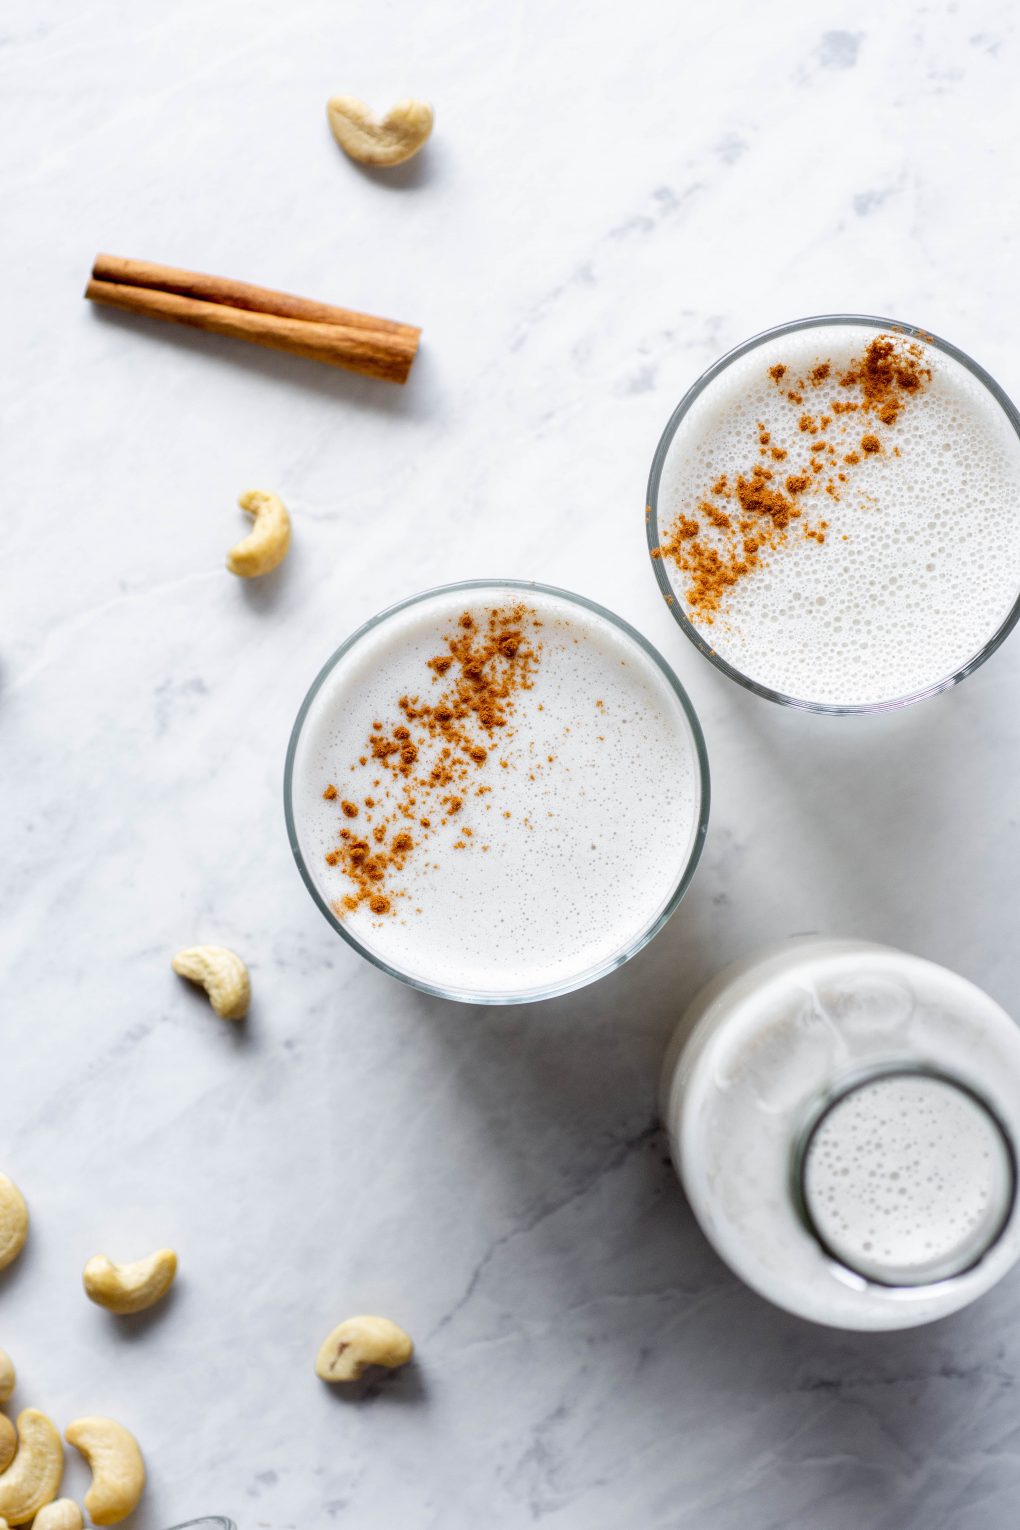 Overhead shot of two side by side glasses of cashew milk sprinkled with cinnamon next to a tall bottle of cashew milk on a marble background next to a cinnamon stick and some scattered cashews